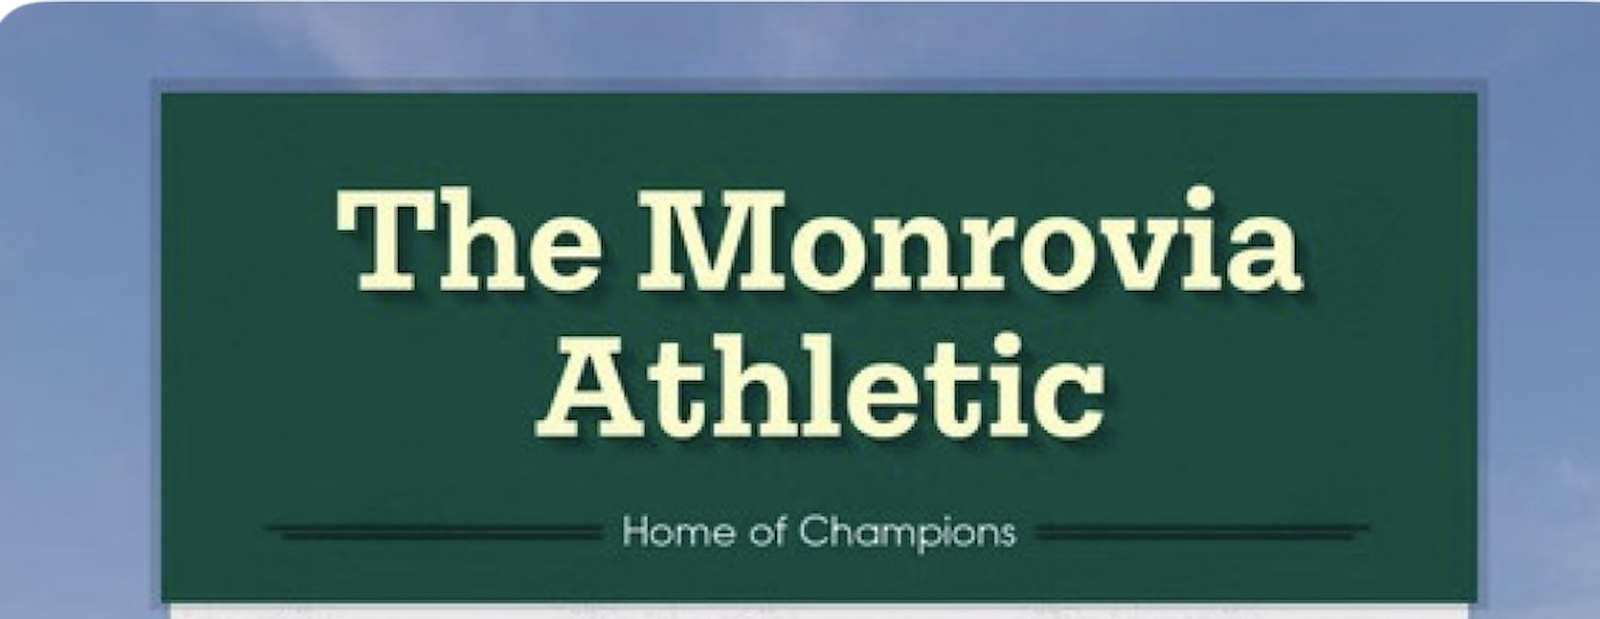 The Monrovia Athletic Newsletter:  January 6th cover photo